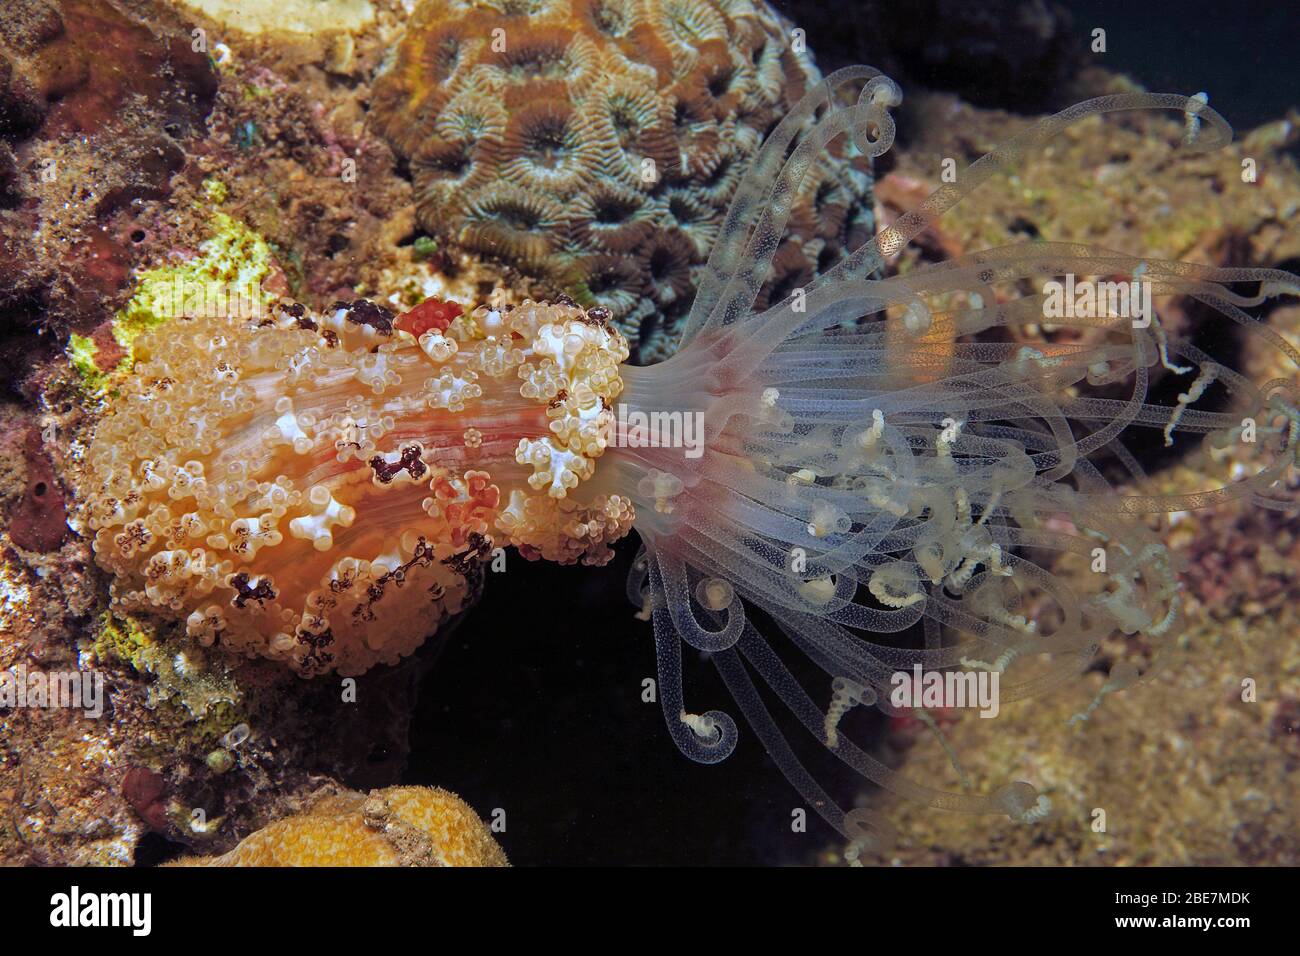 Tuberculate Night Anemone (Alicia sansibarensis), sea anemone with extremely long tentacles, Camiguin, Philippines Stock Photo